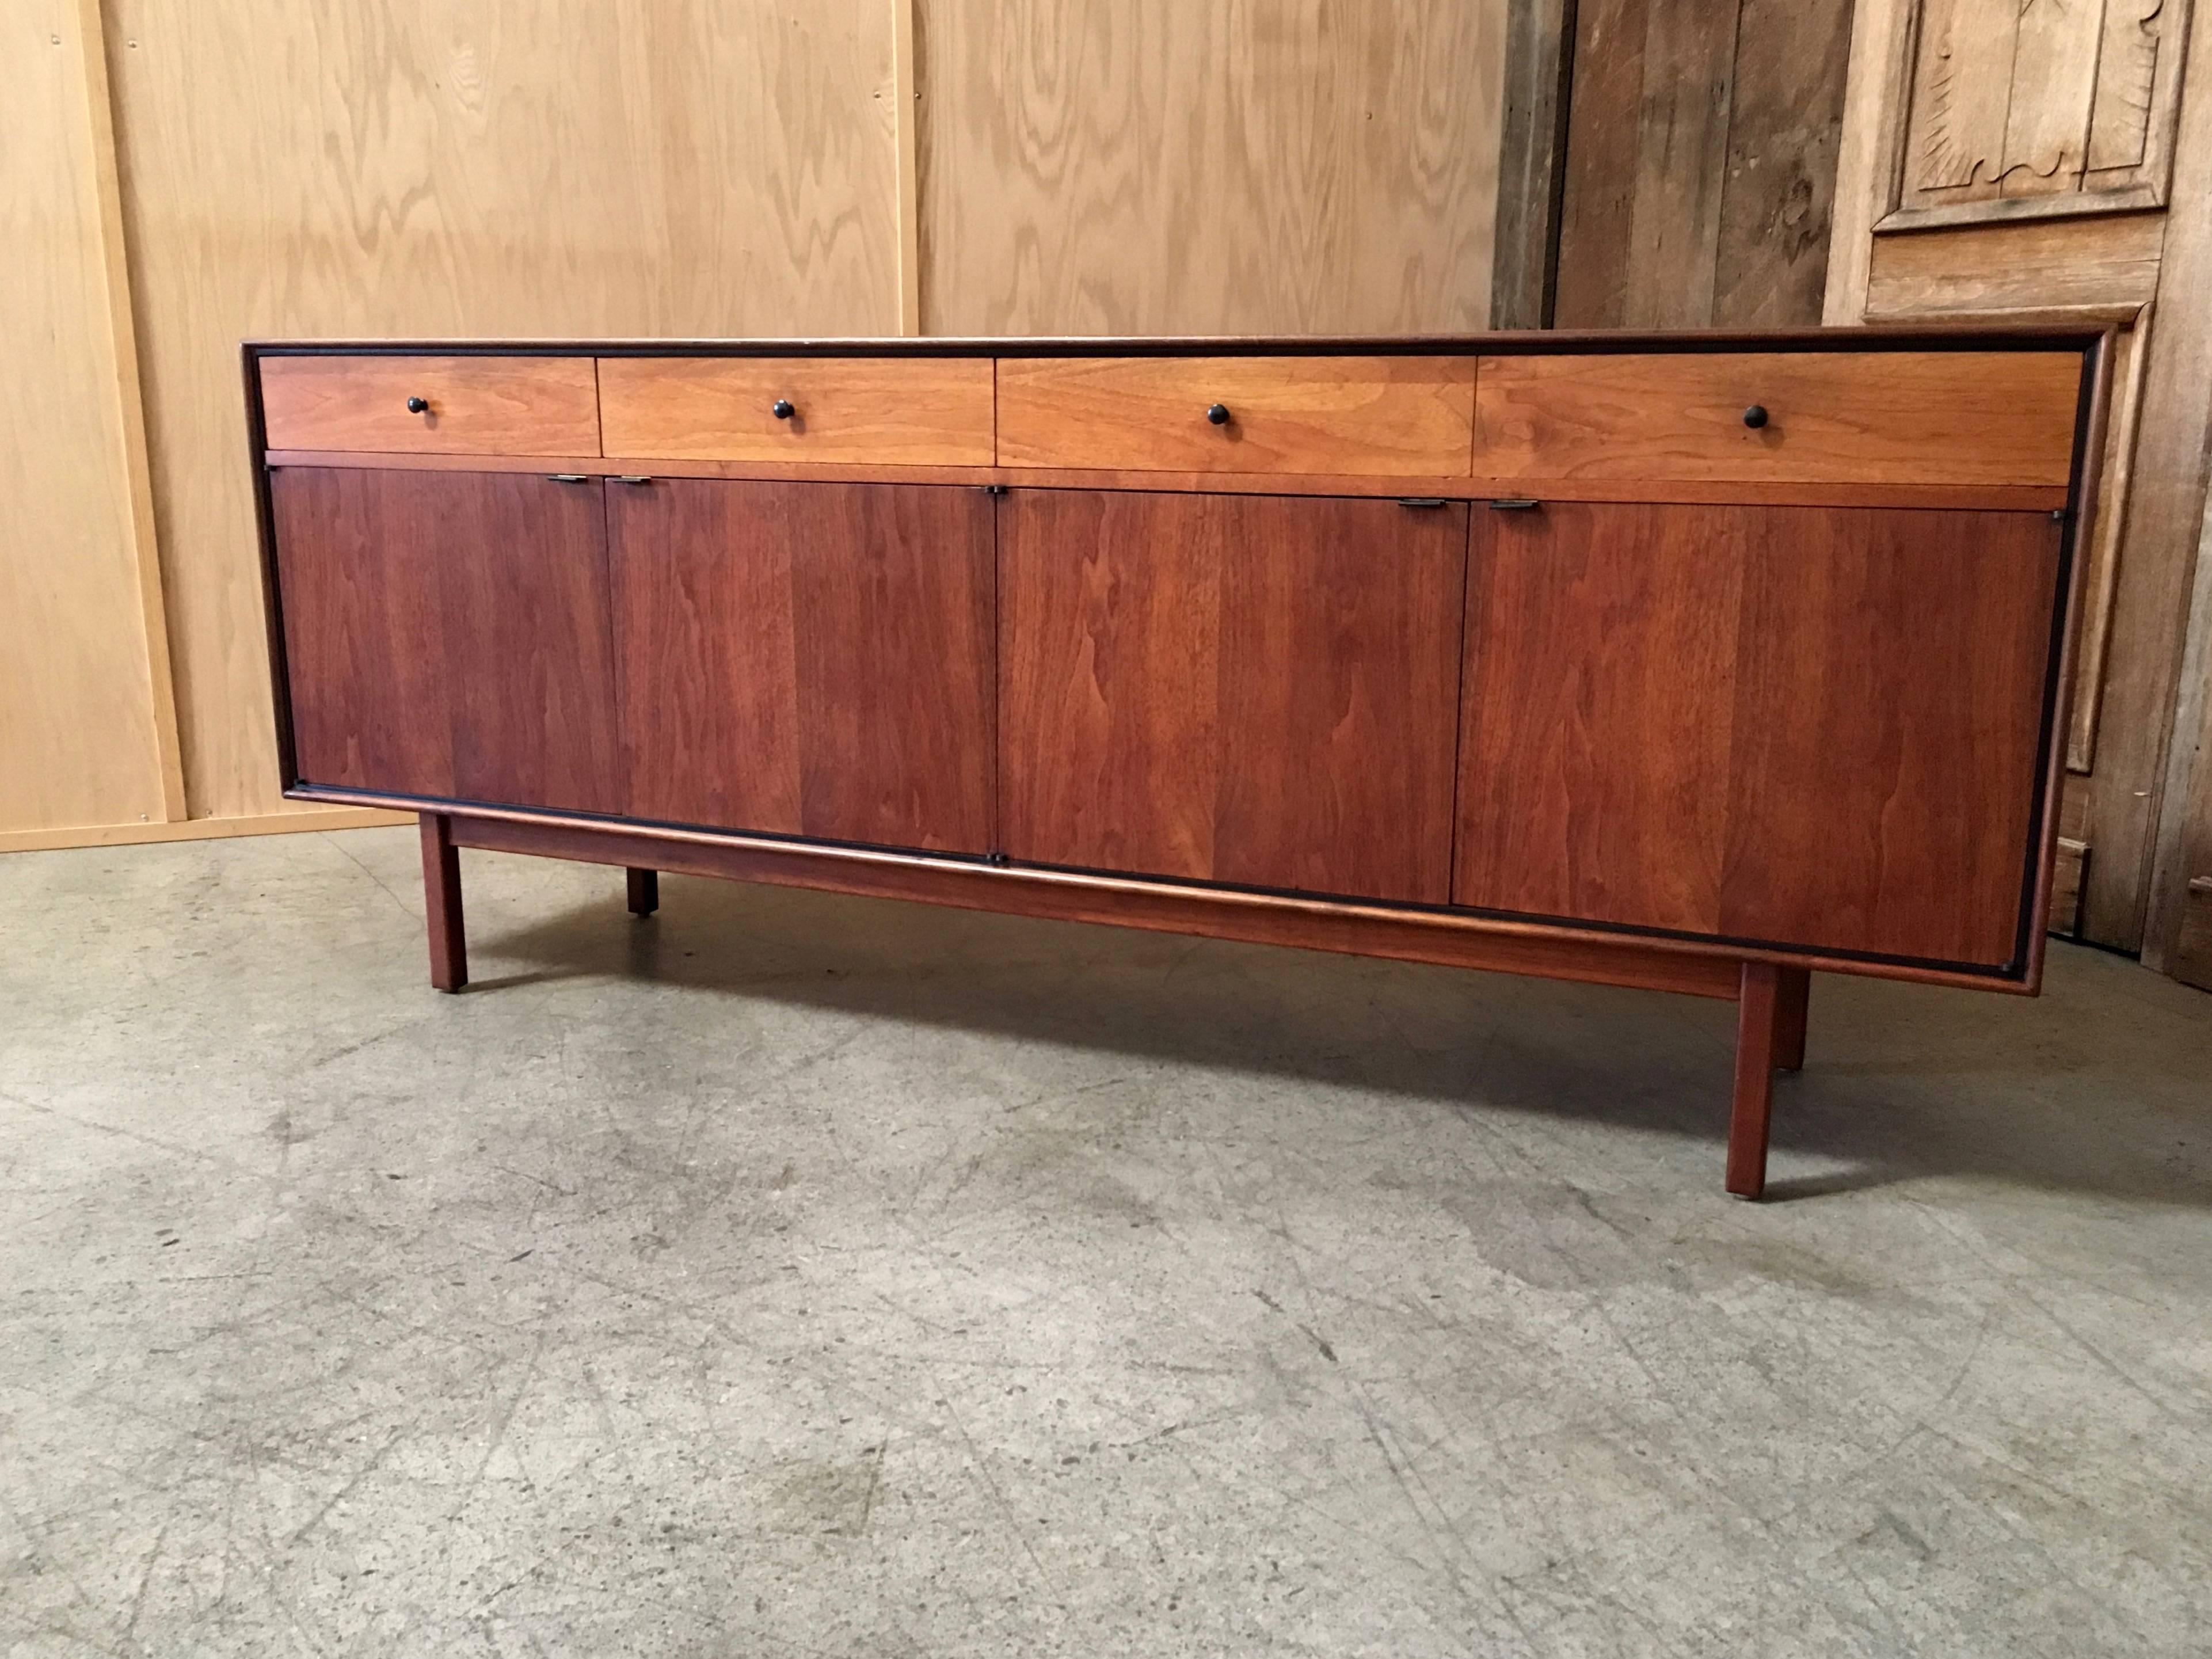 Large four-drawer over four-door walnut credenza with dividers in two of the drawers for flatware and shelves inside the doored section with black leather door pulls.